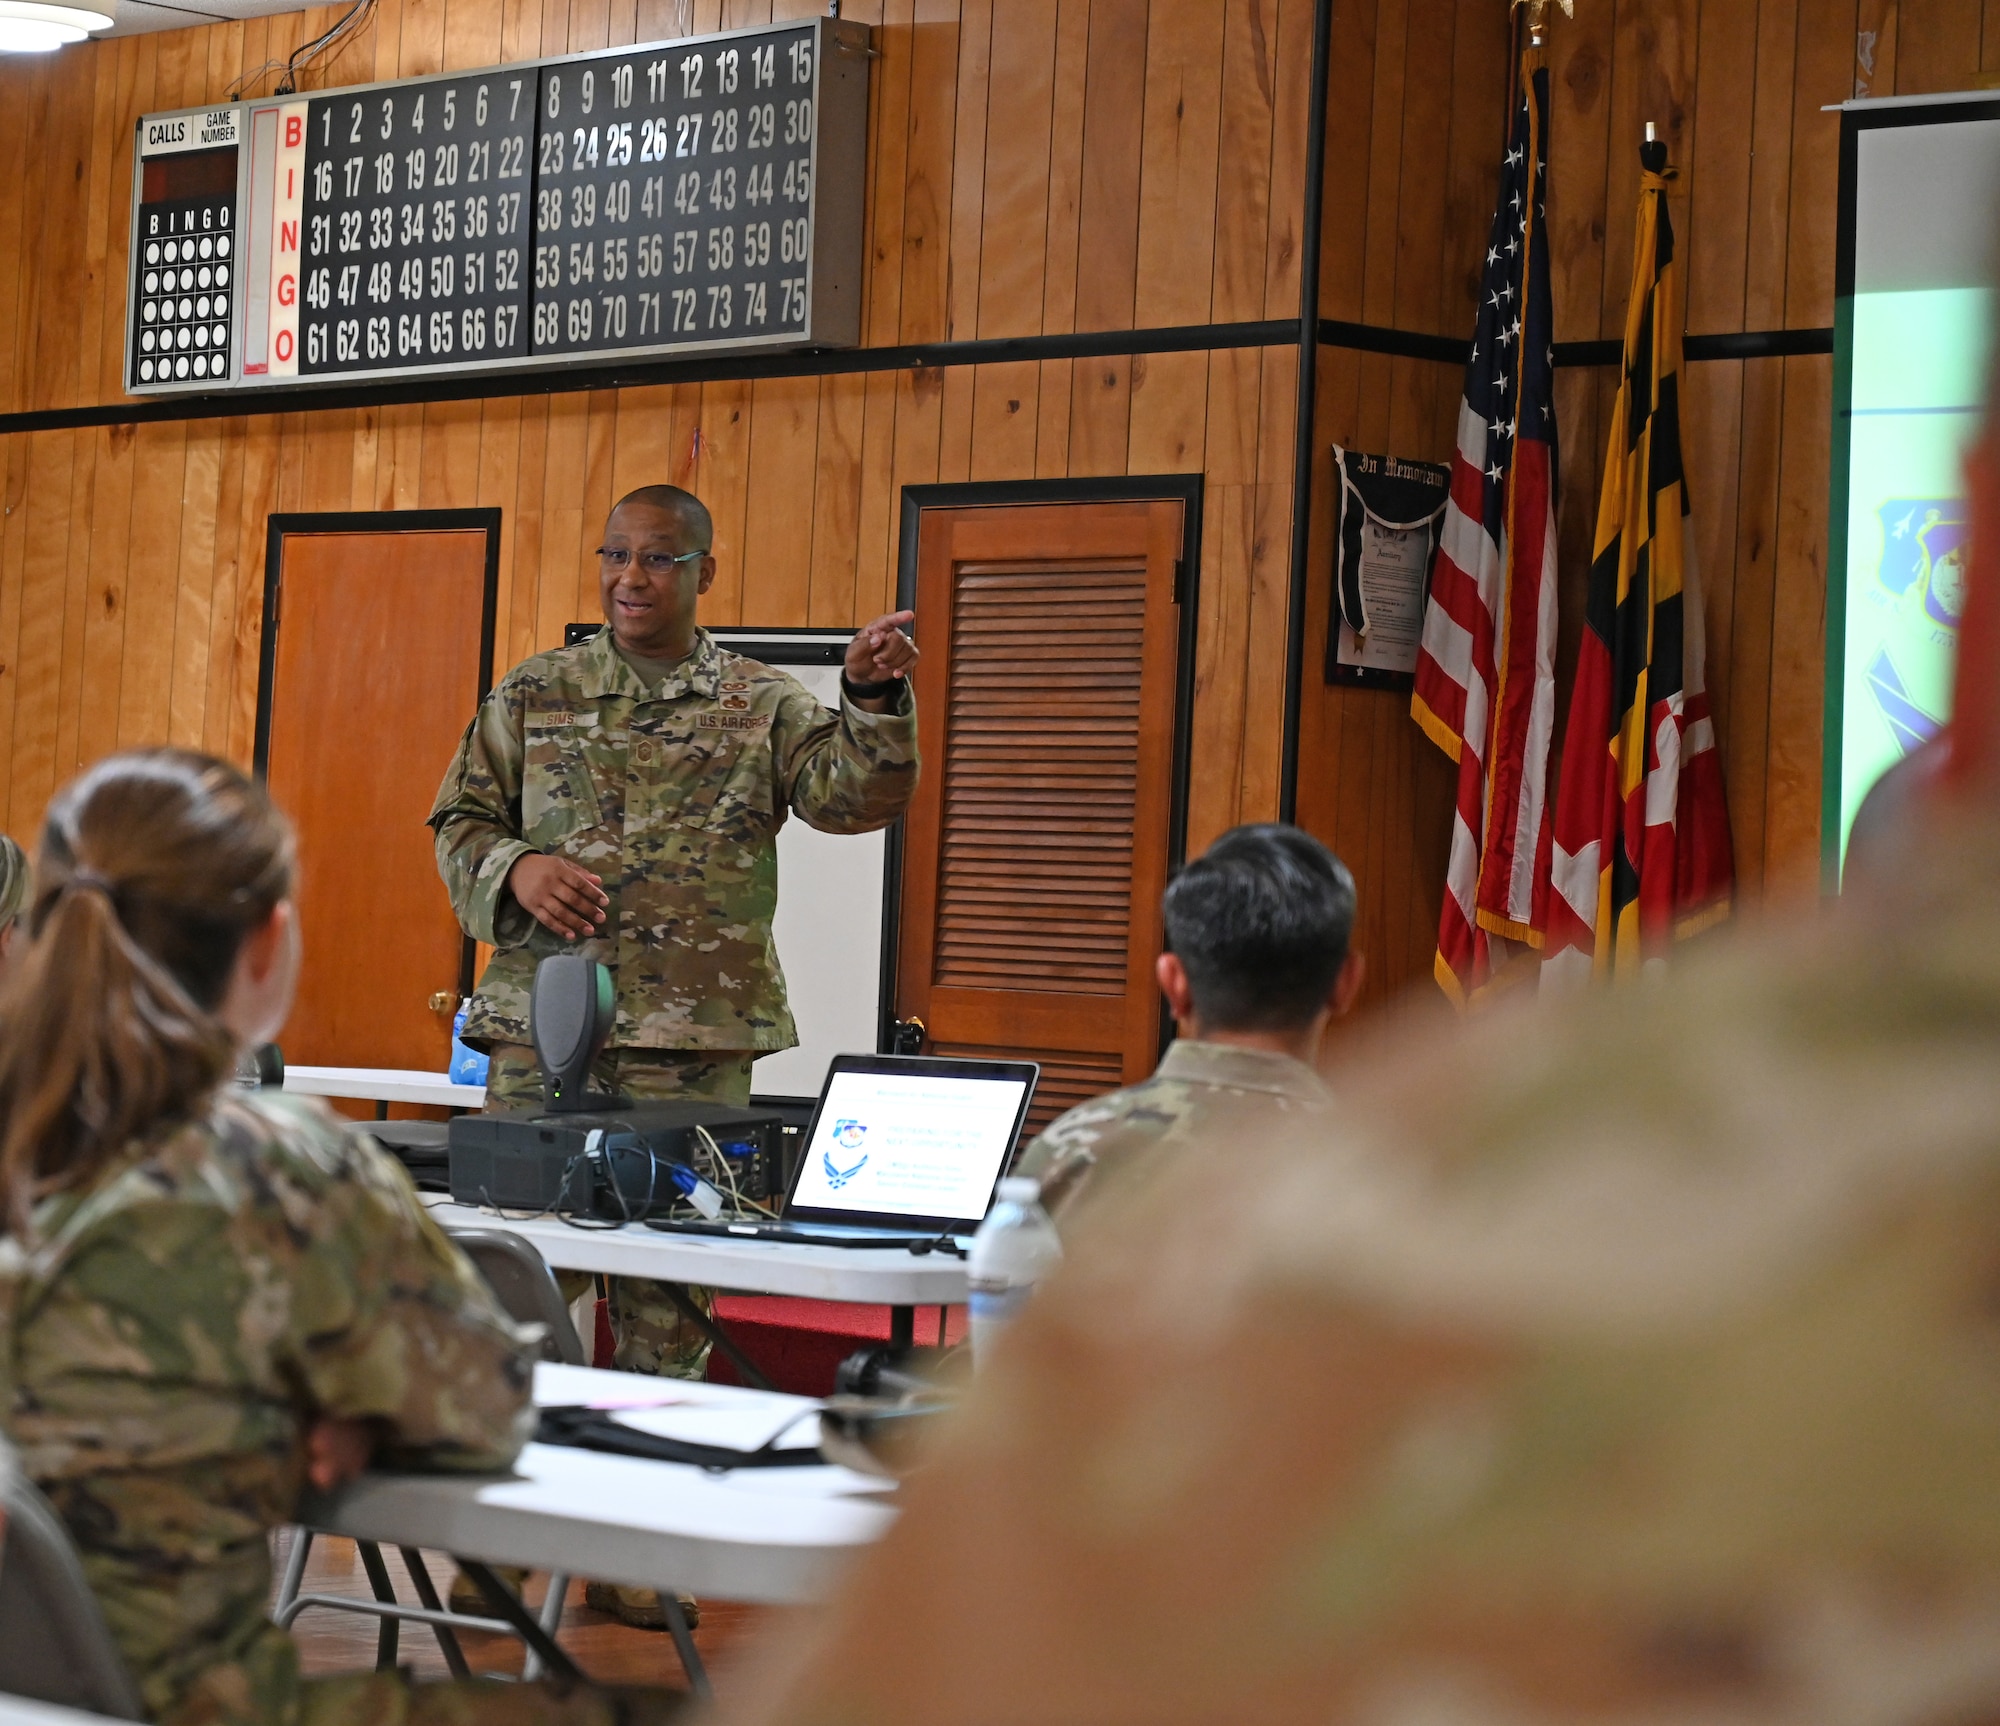 U.S. Air Force Chief Master Sgt. Anthony Sims, Maryland Air National Guard state command chief, speaks to Maryland Air National Guard Airmen at the Chief Master Sergeant's Professional Development Course at the Veterans of Foreign Wars Post 2621 in Essex, Maryland, August 4, 2022. Chief Sims currently serves as the 12th Maryland Air National Guard state command chief and will assume the role of Maryland National Guard senior enlisted leader on August 15. (U.S. Air National Guard photo by Master Sgt. Chris Schepers)